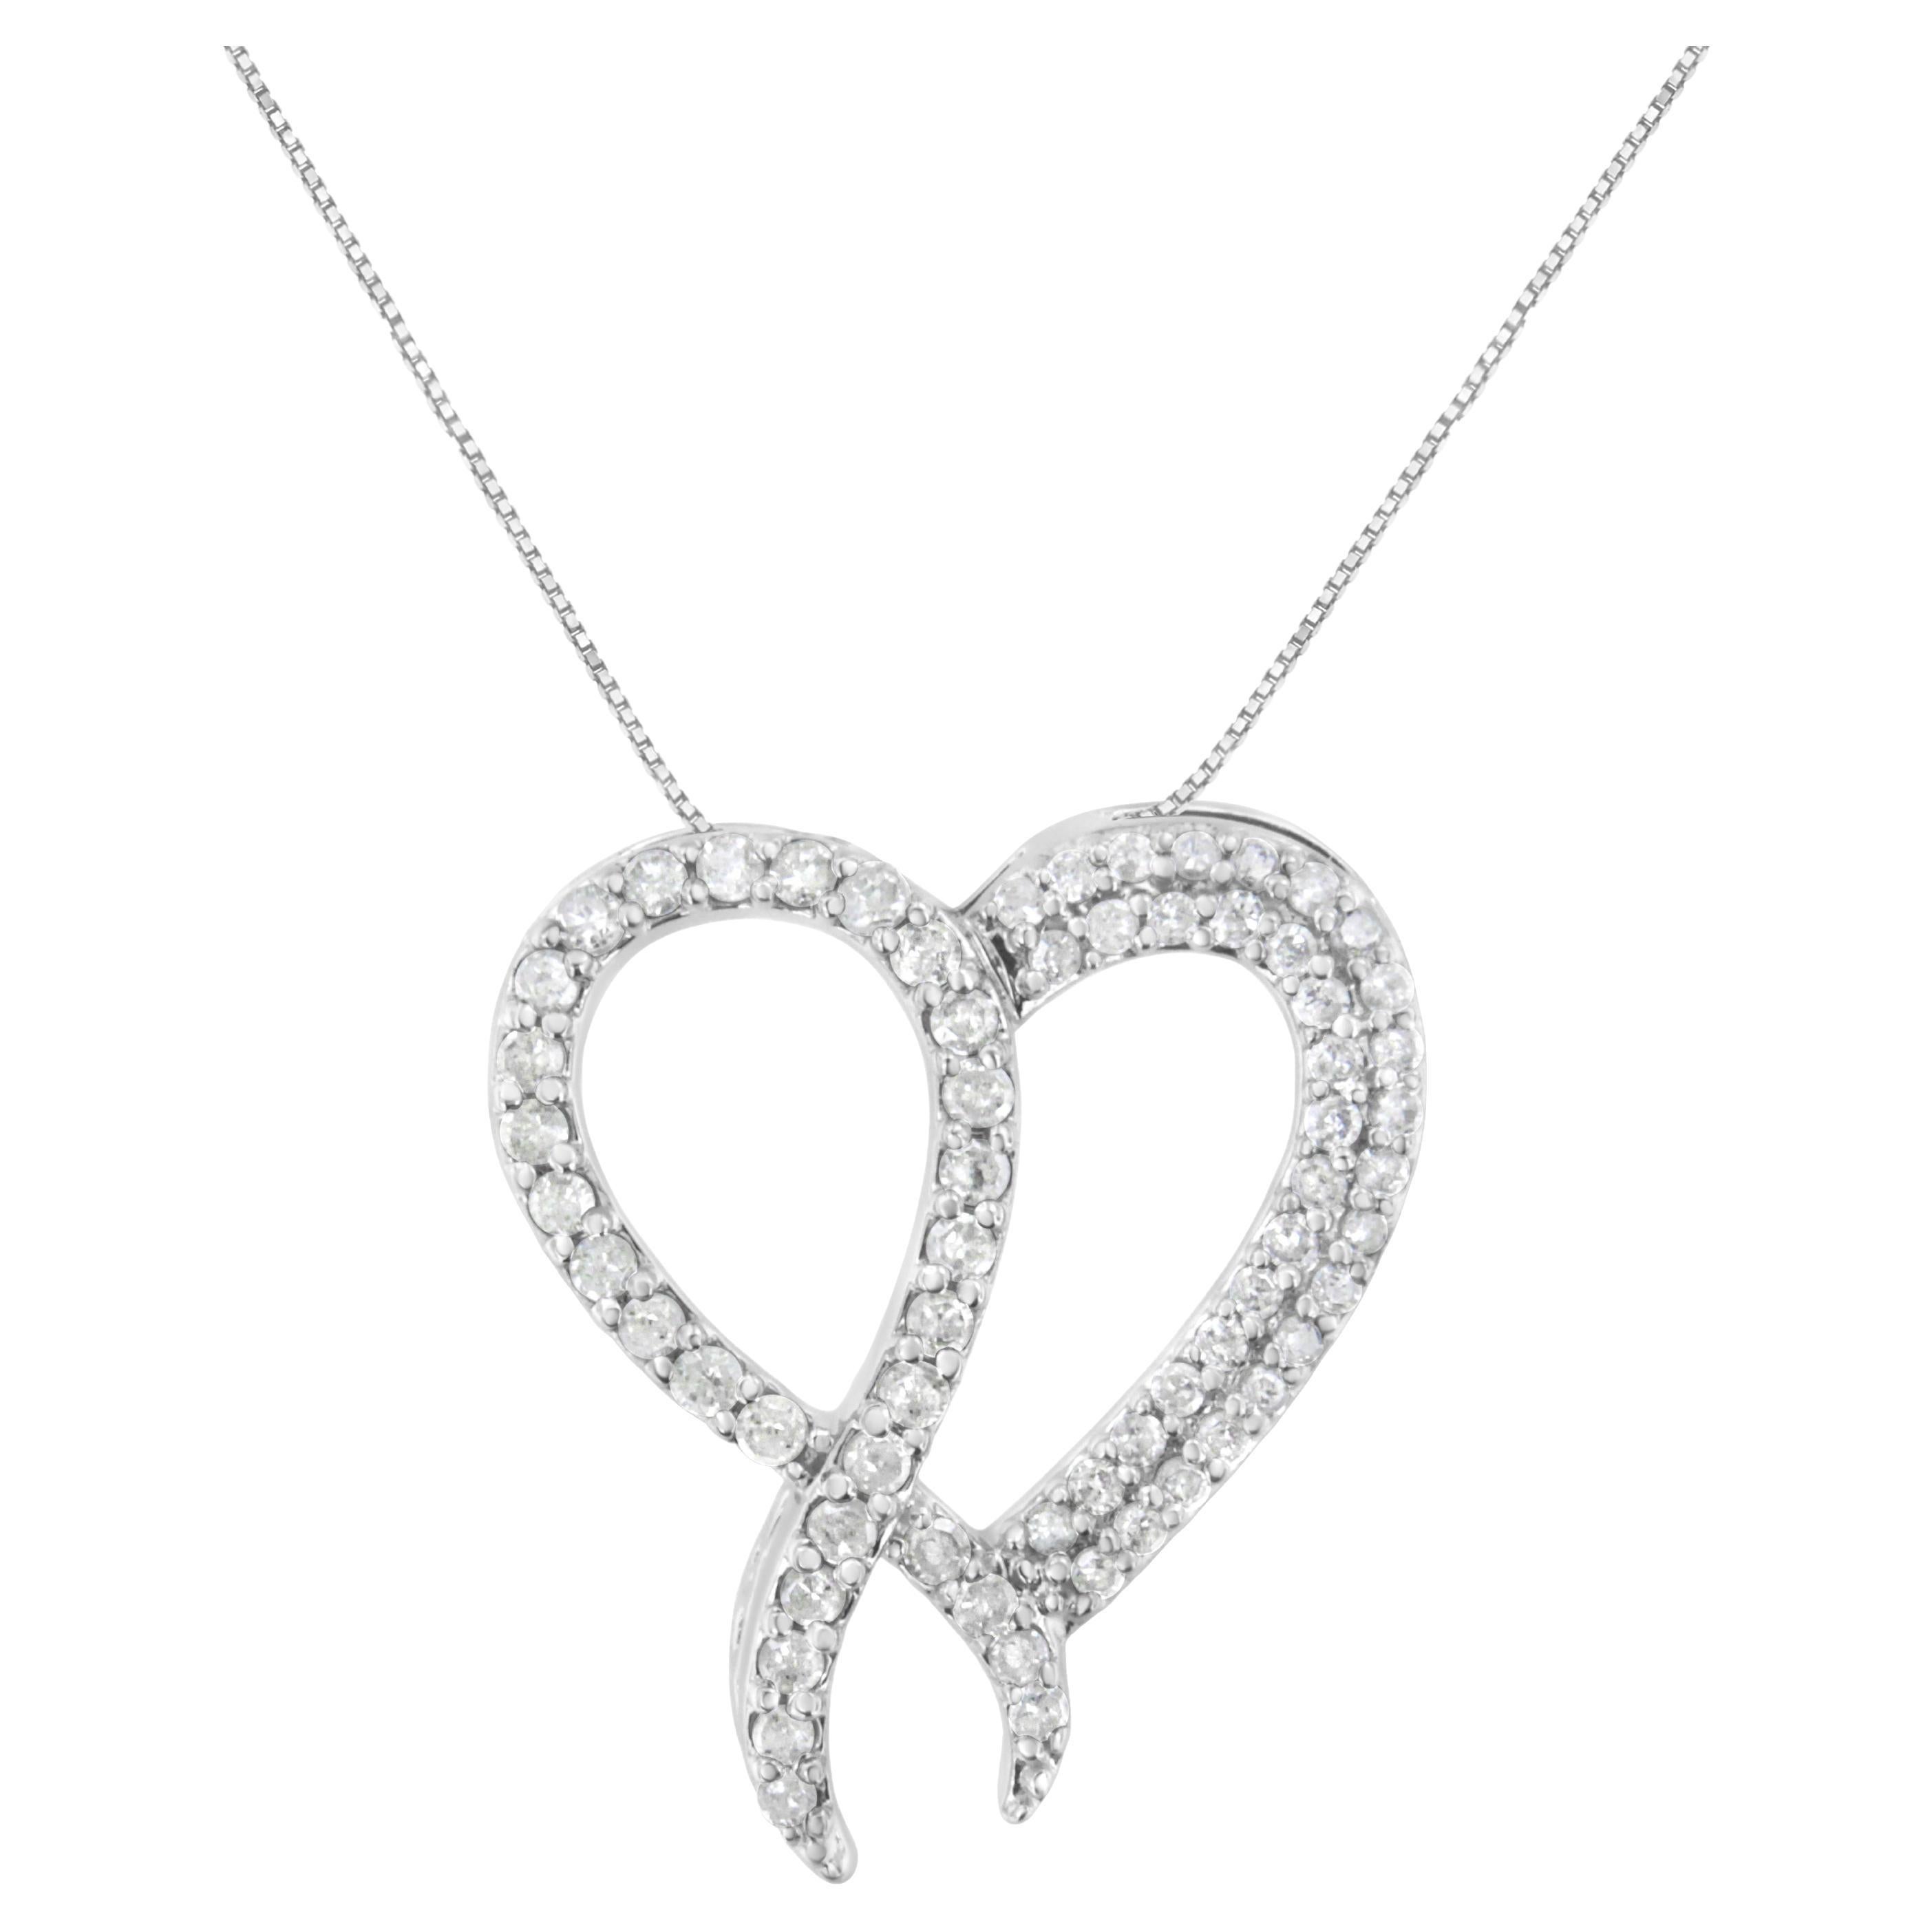 .925 Sterling Silver 1.0 Carat Diamond Heart and Ribbon Pendant Necklace For Sale